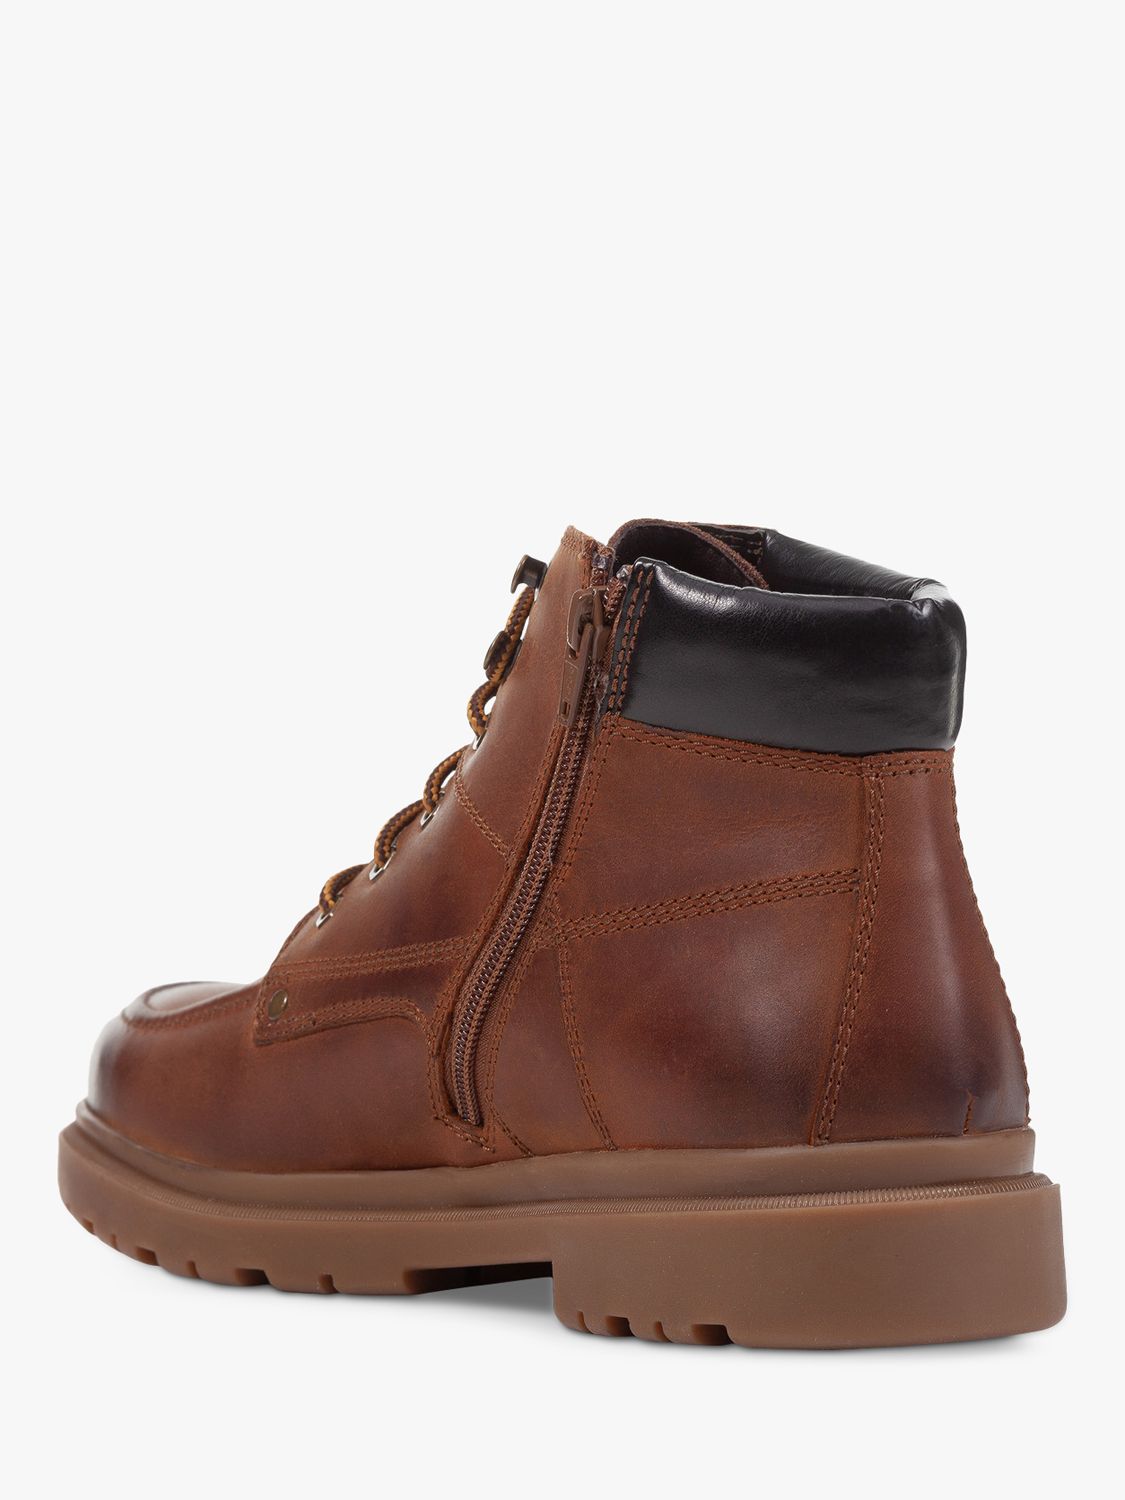 Tanga estrecha Preparación Buena suerte Geox Wide Fit Andalo Leather Lace Up Ankle Boots, Brown at John Lewis &  Partners